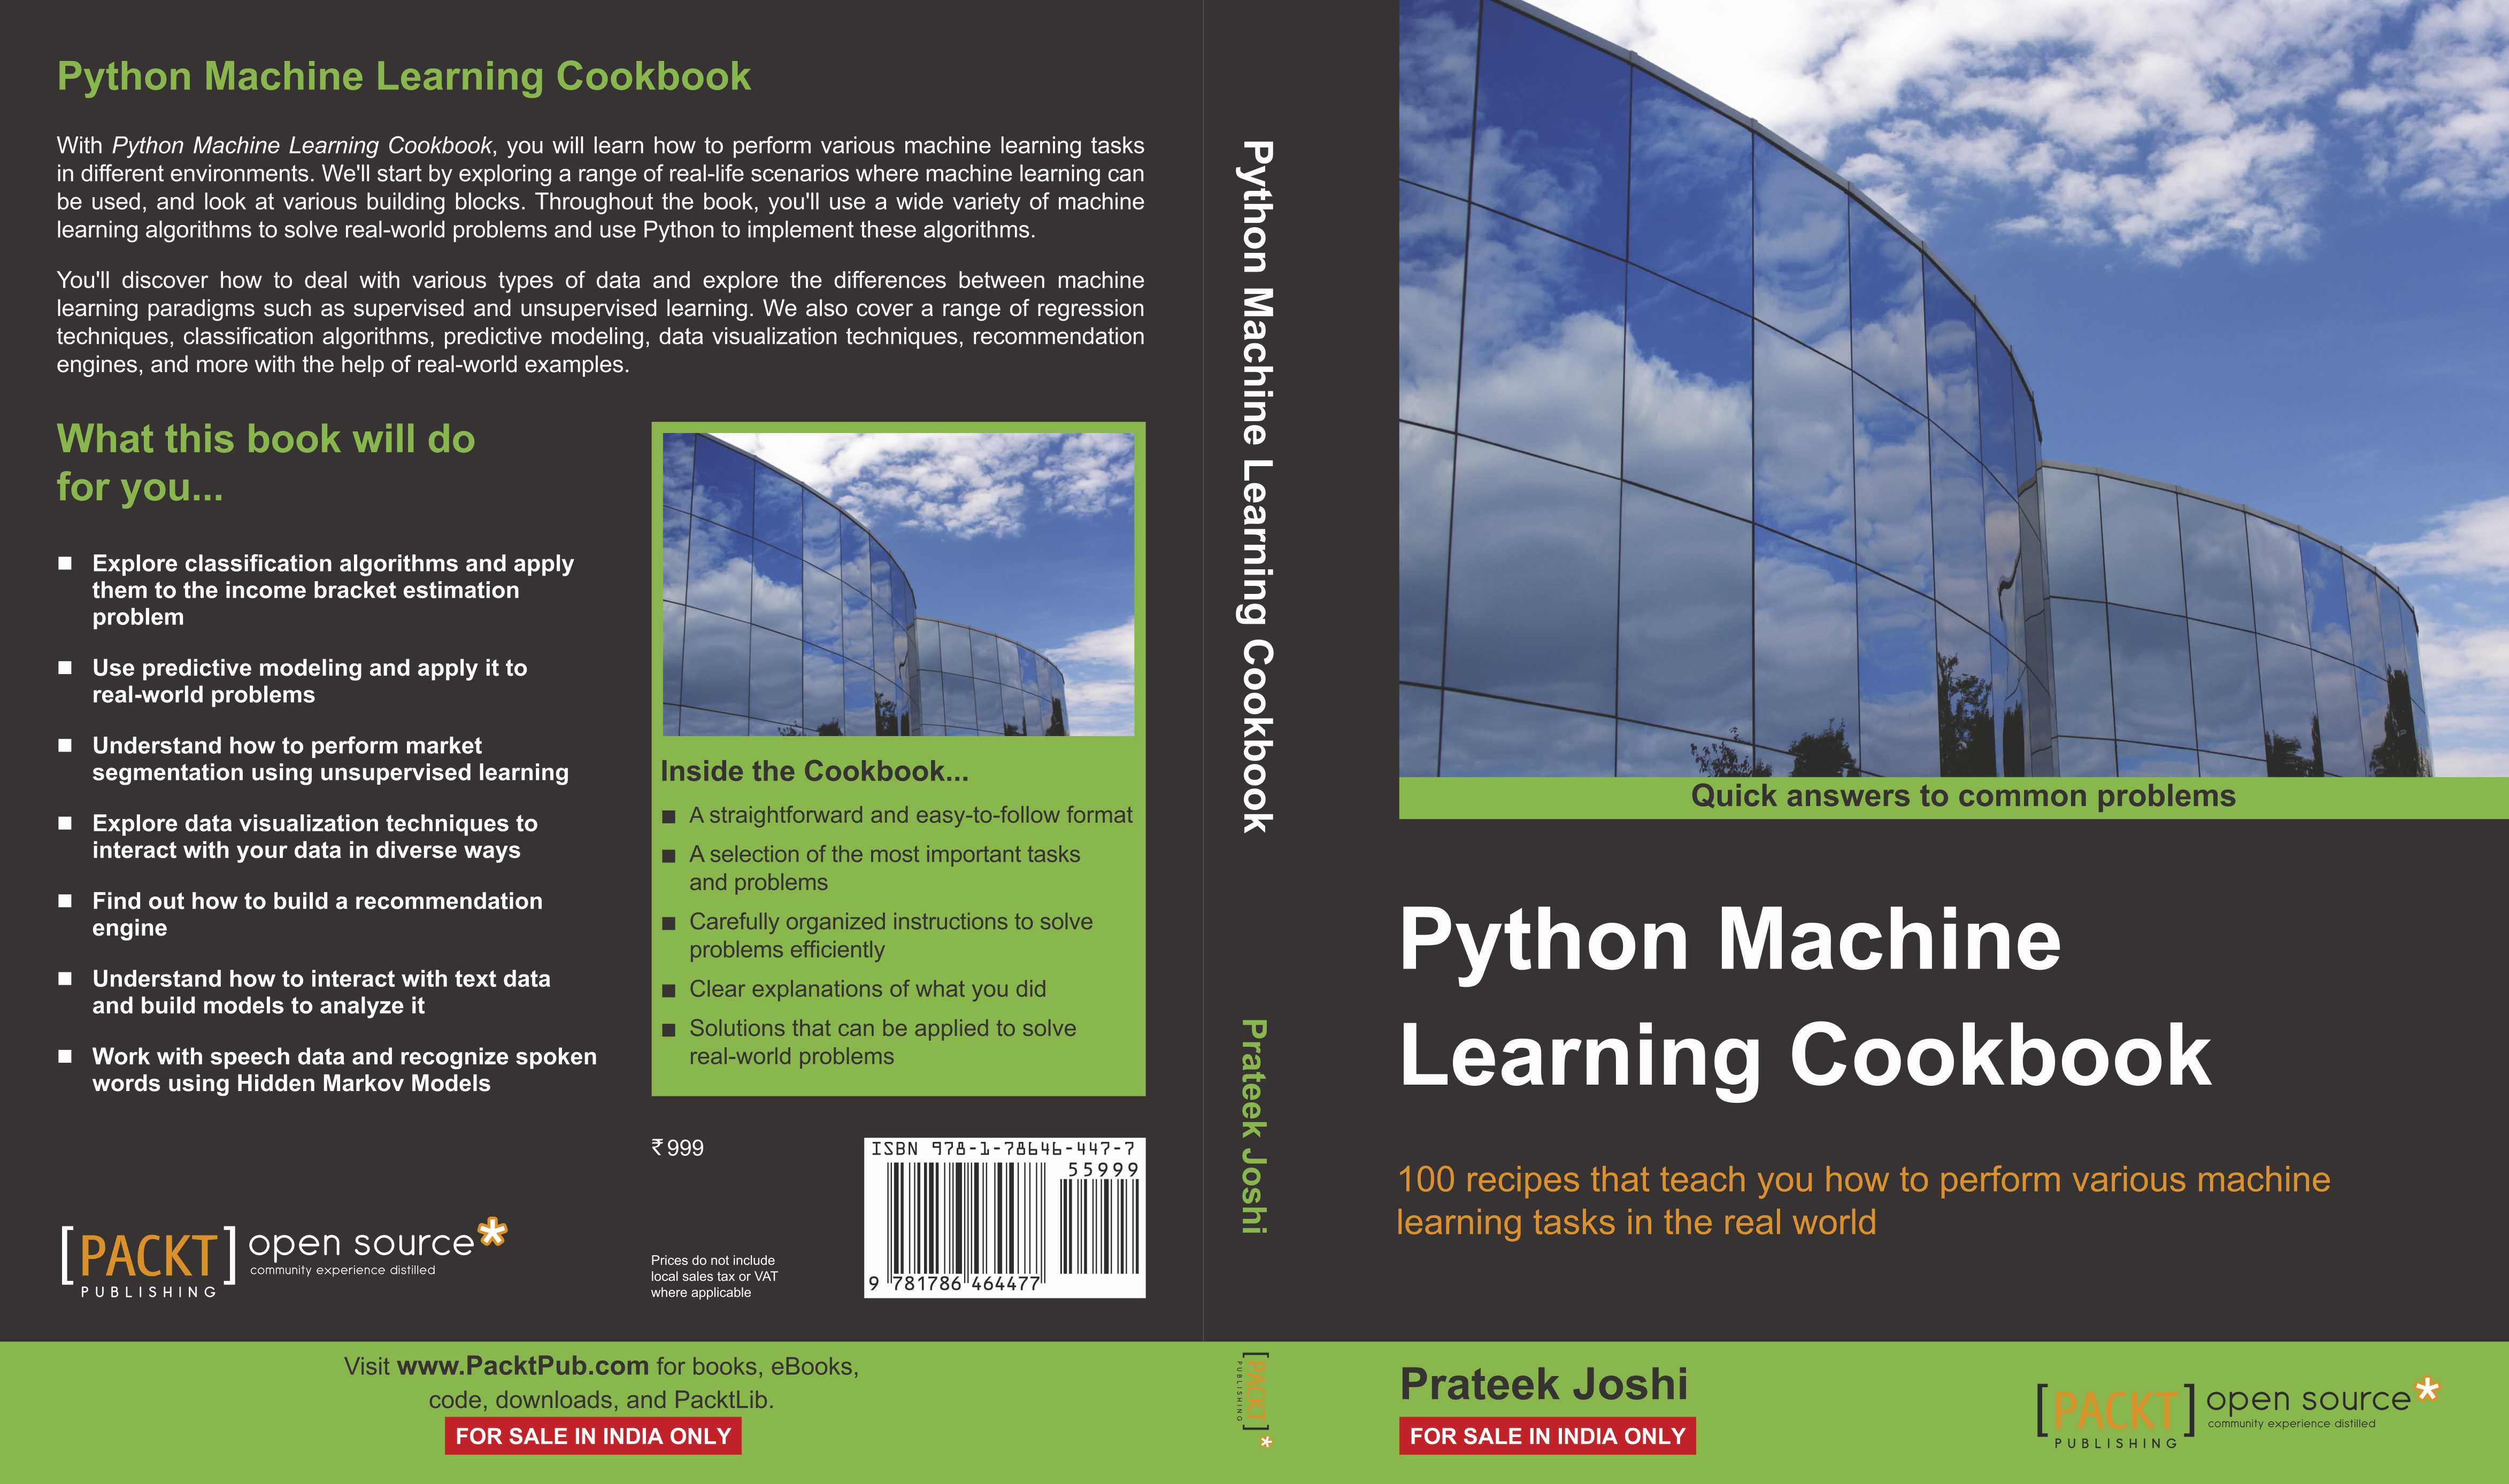 Buy Python Machine Learning Cookbook Online ₹999 From Shopclues 3834